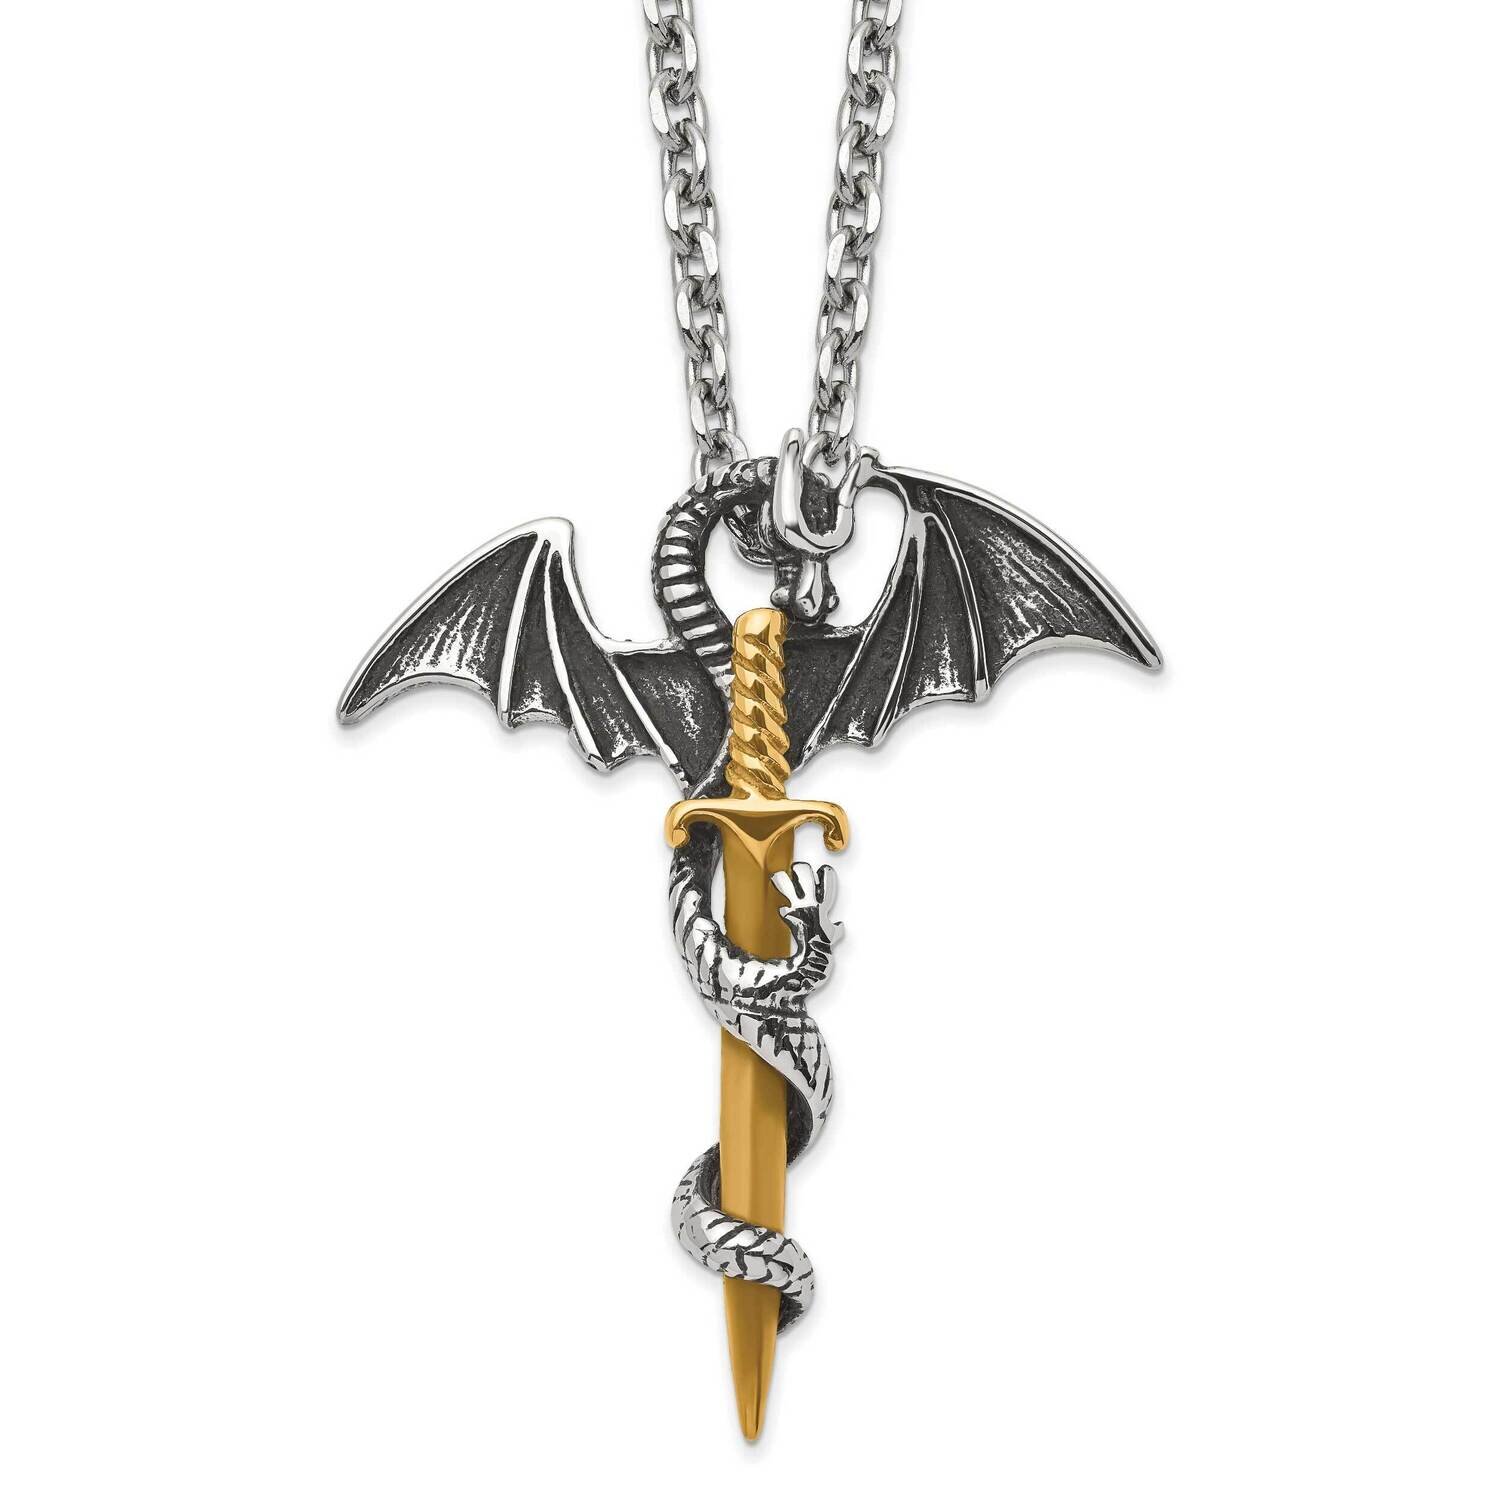 Antiqued & Polished Yellow Ip Dragon/Sword 24 Inch Necklace Stainless Steel SRN2858-24